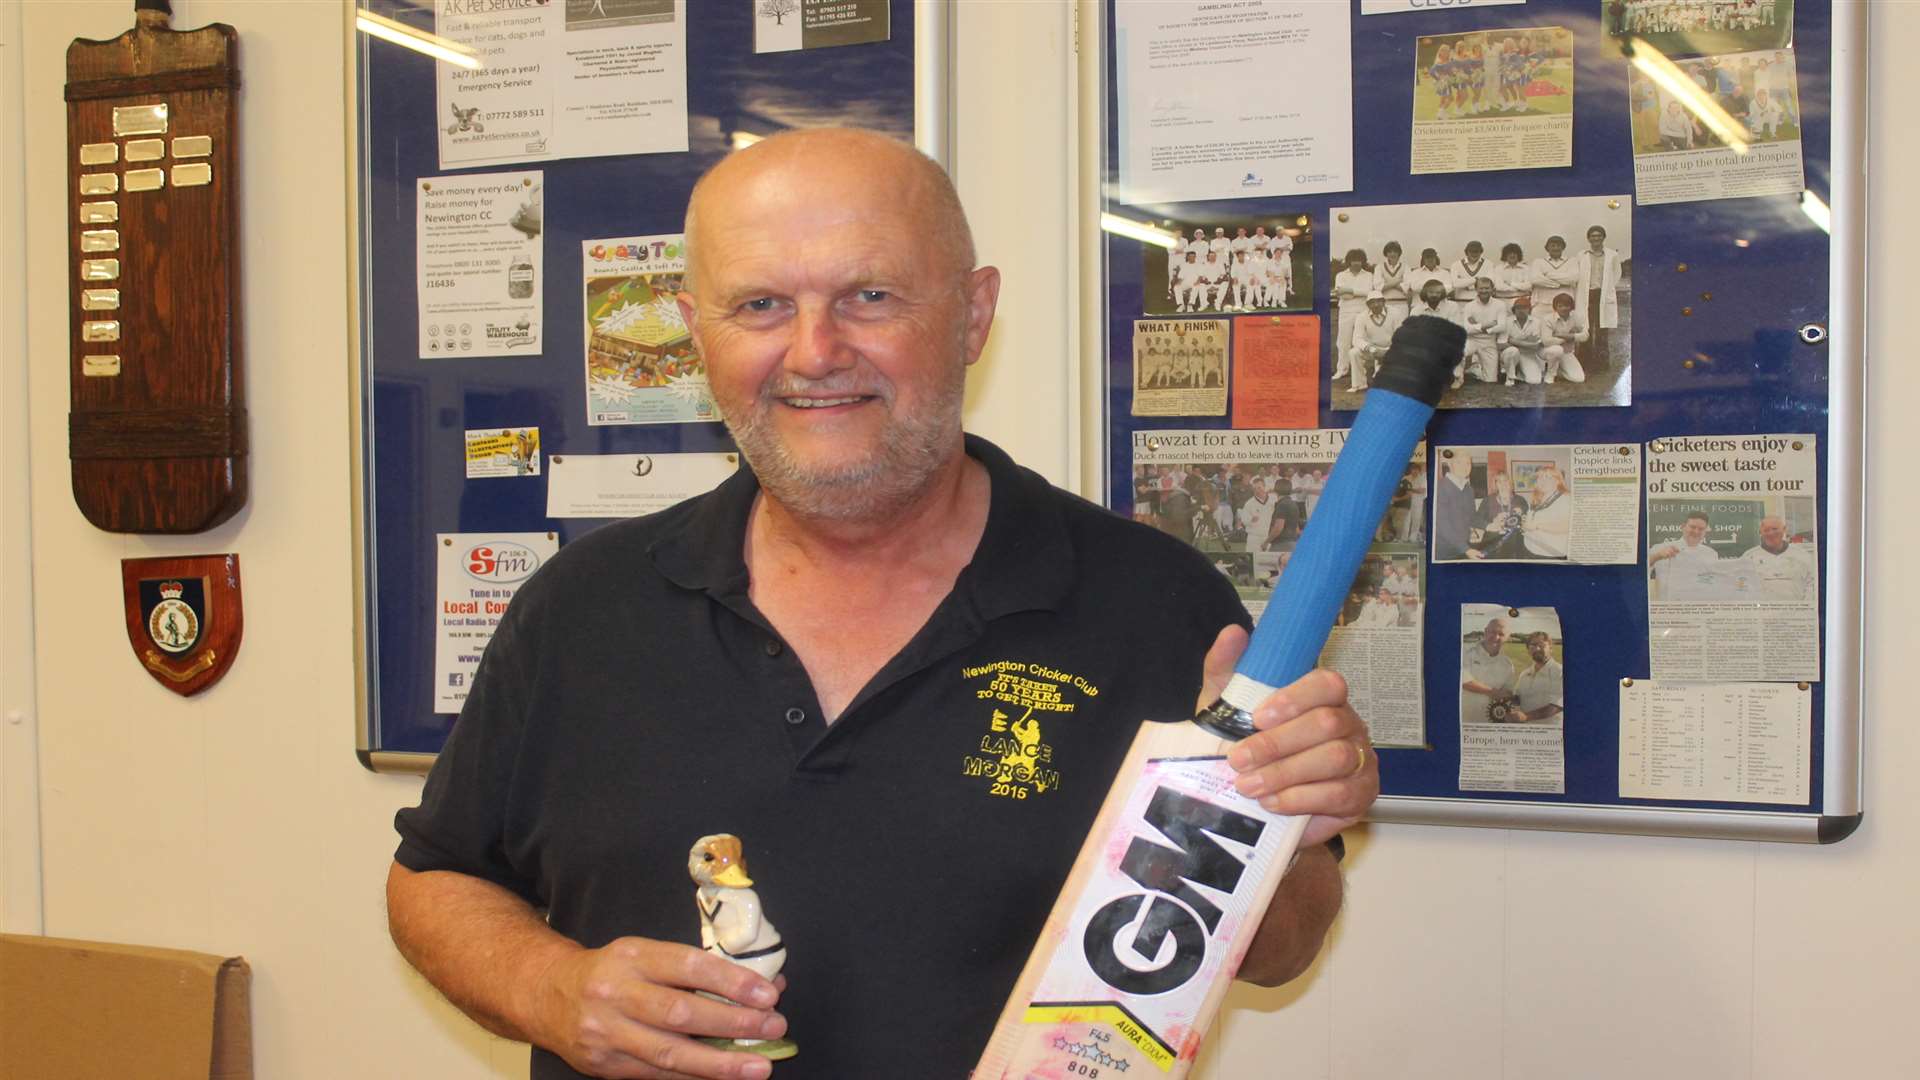 Lance Morgan celebrated 50 years as a player at Newington Cricket Club